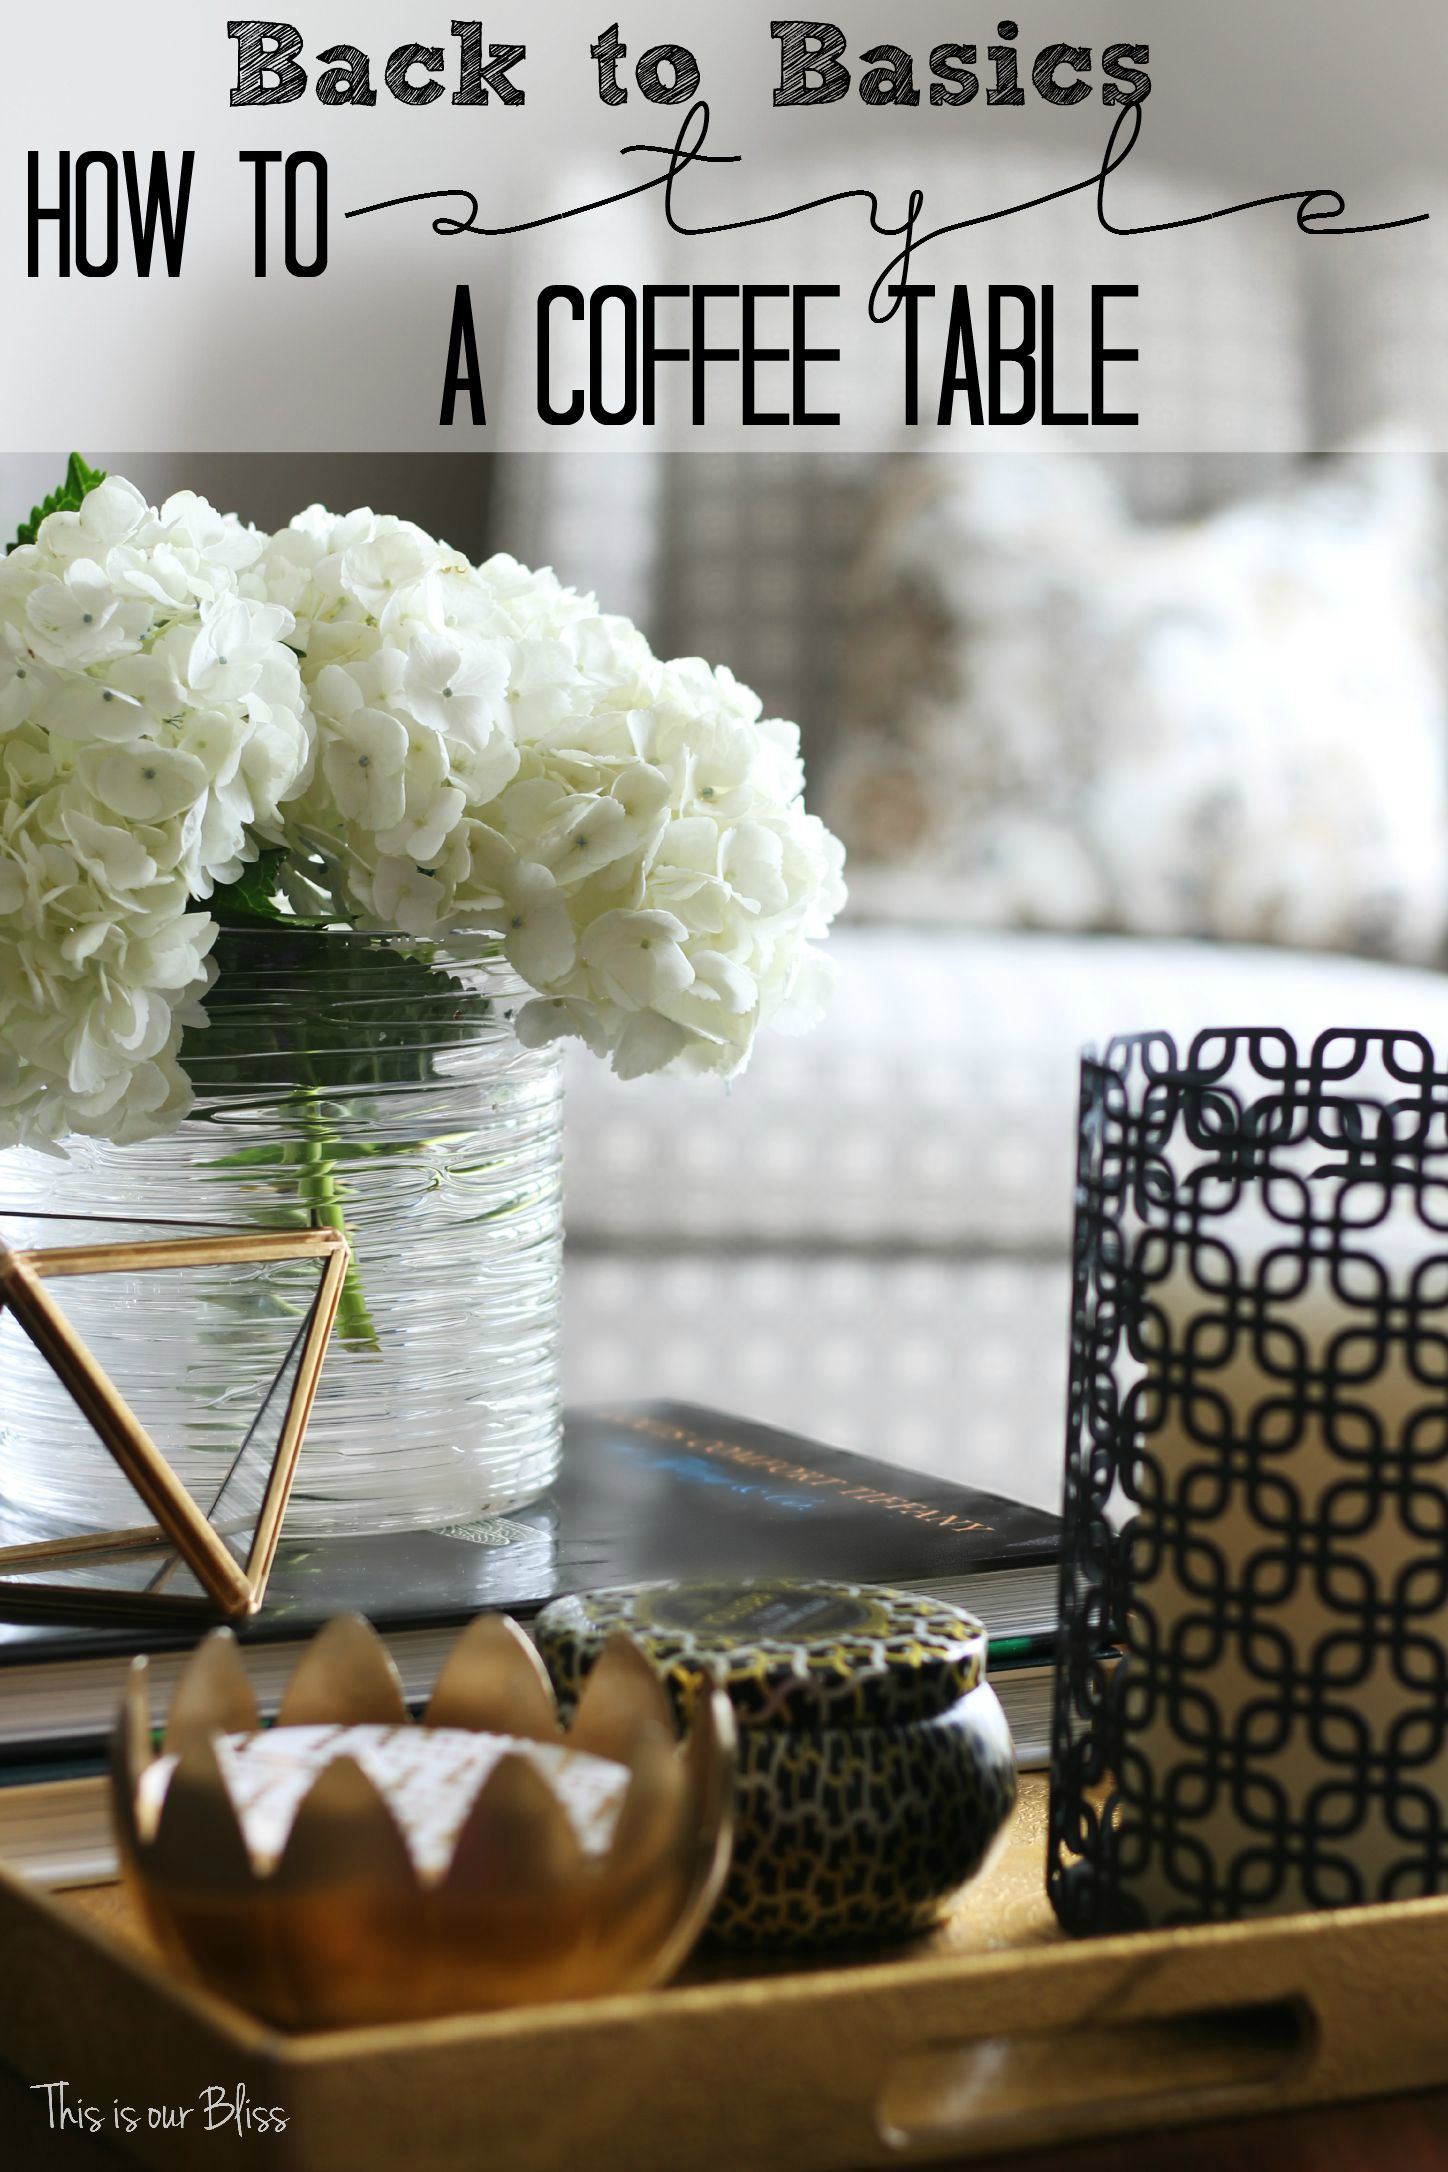 https://thisisourbliss.com/wp-content/uploads/2015/09/how-to-style-a-coffee-table-coffee-table-styling-elements-of-a-well-styled-coffee-table-back-to-basics-3-this-is-our-bliss.jpg